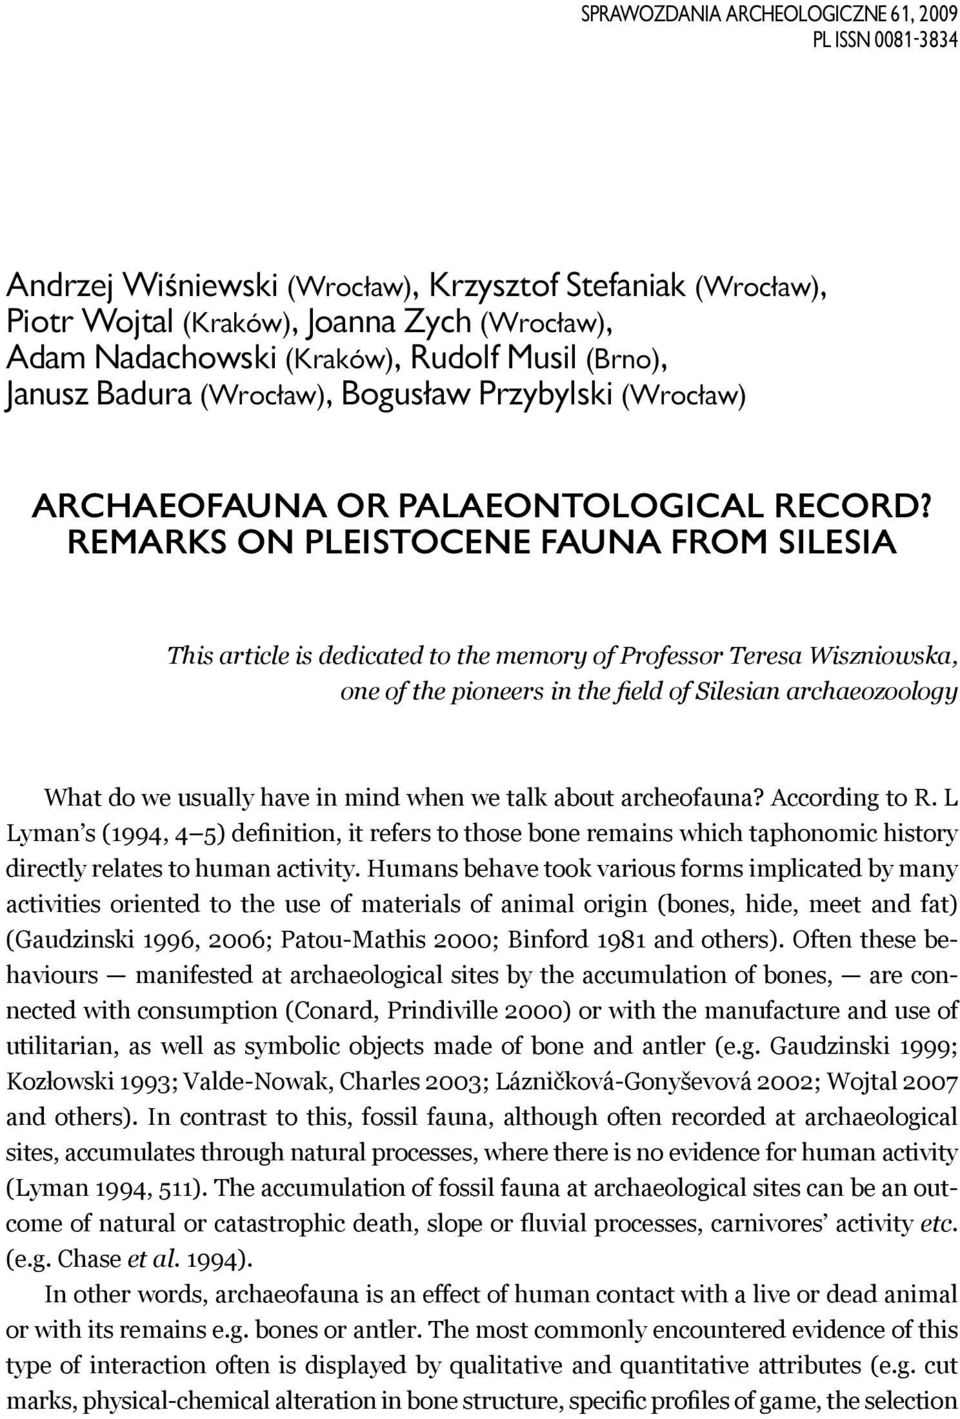 Remarks on Pleistocene fauna from Silesia This article is dedicated to the memory of Professor Teresa Wiszniowska, one of the pioneers in the field of Silesian archaeozoology What do we usually have